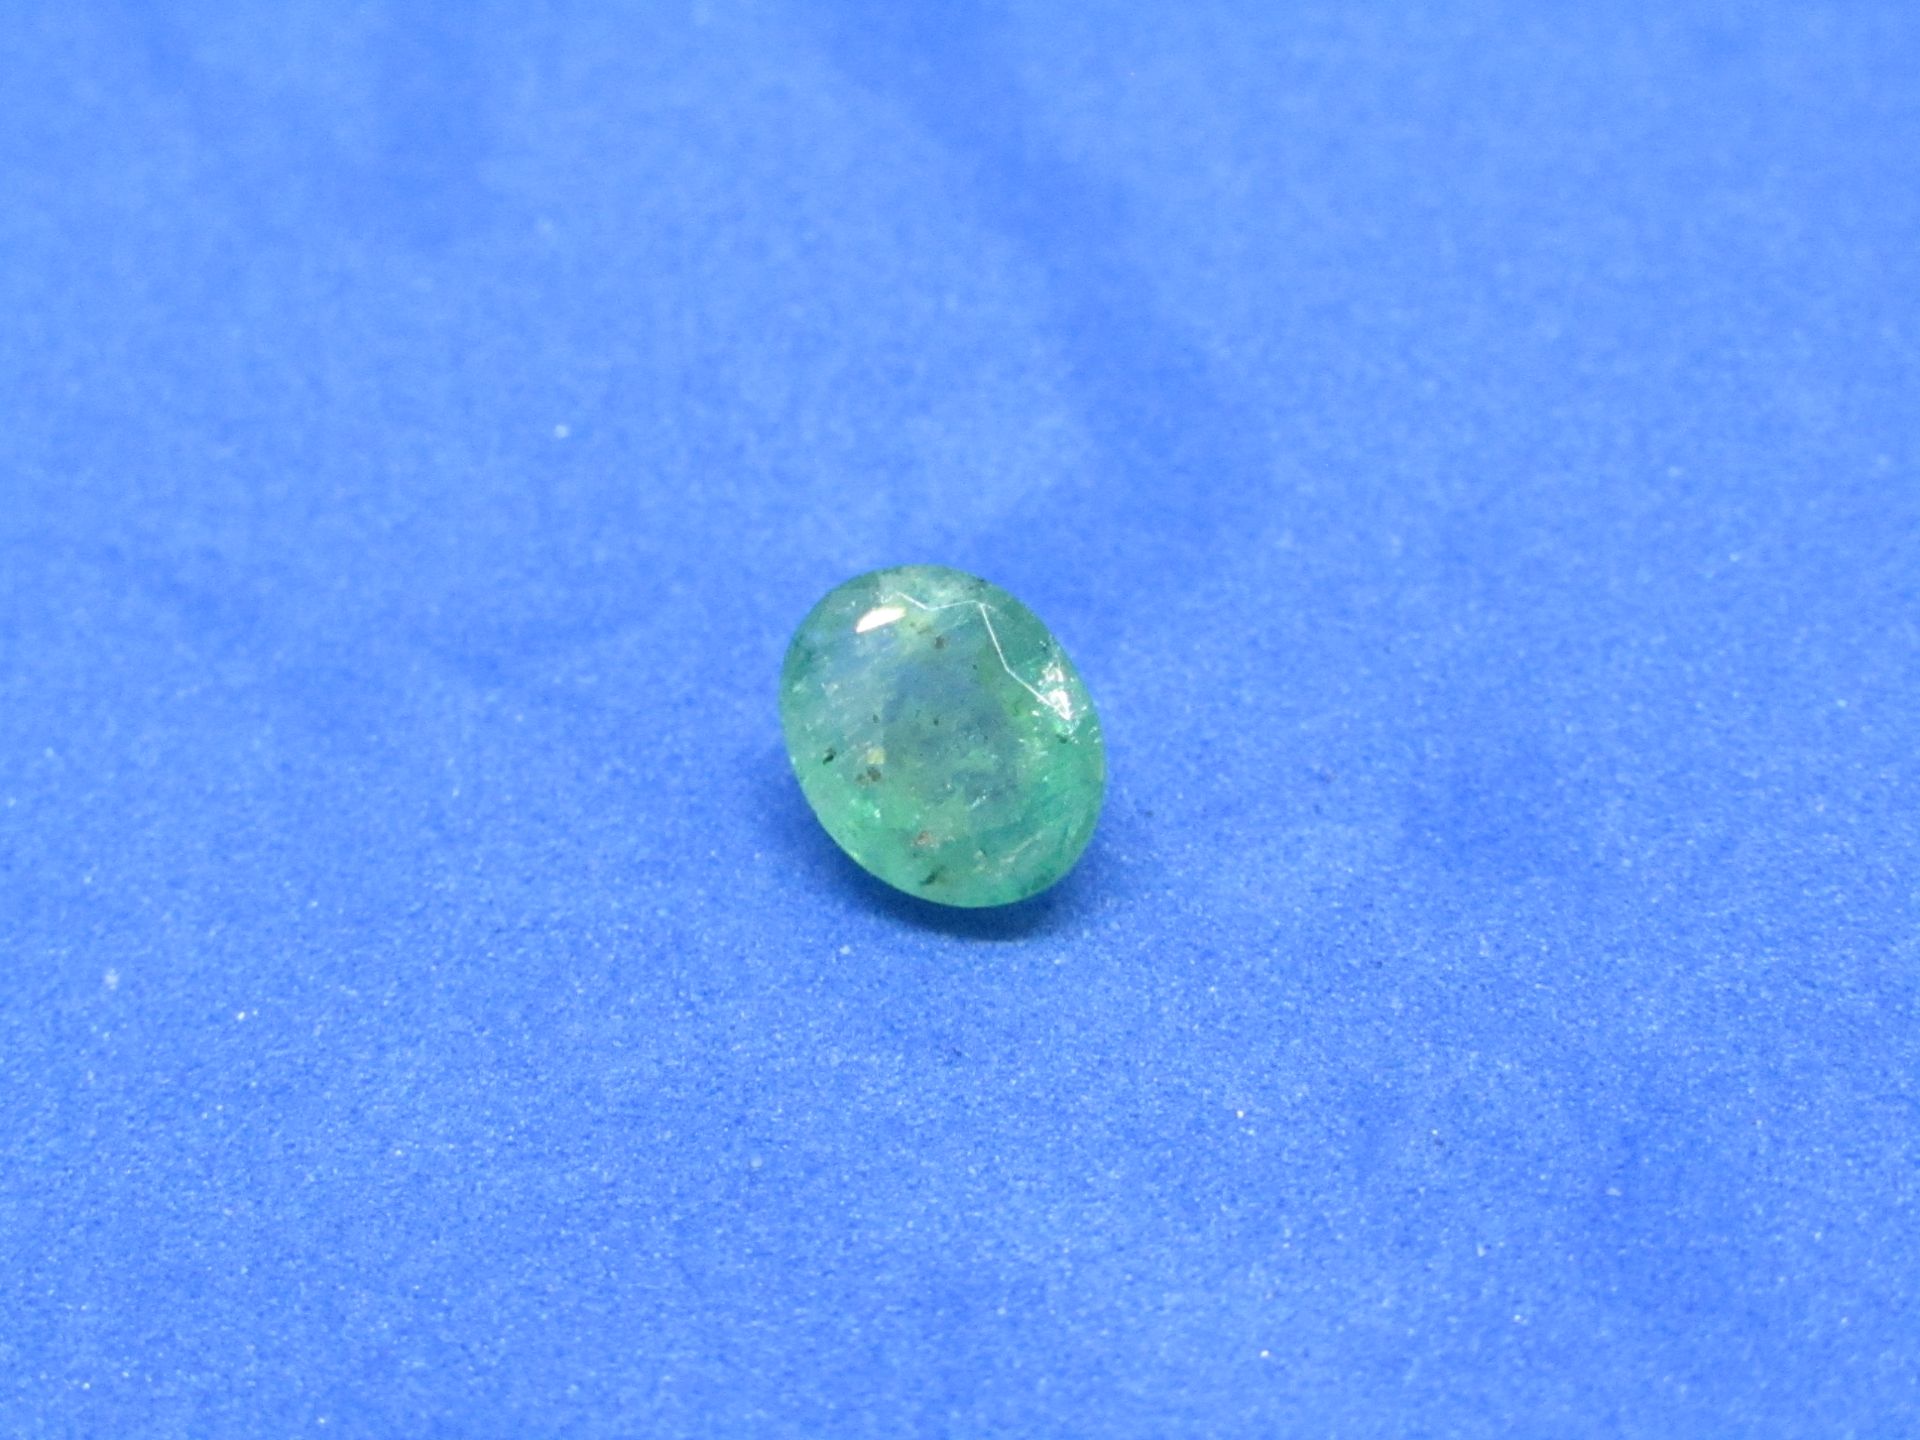 ** NO BUYERS COMMISSION ON THIS LOT ** Natural Emerald - 0.89 Carat Average retail value Gemstone